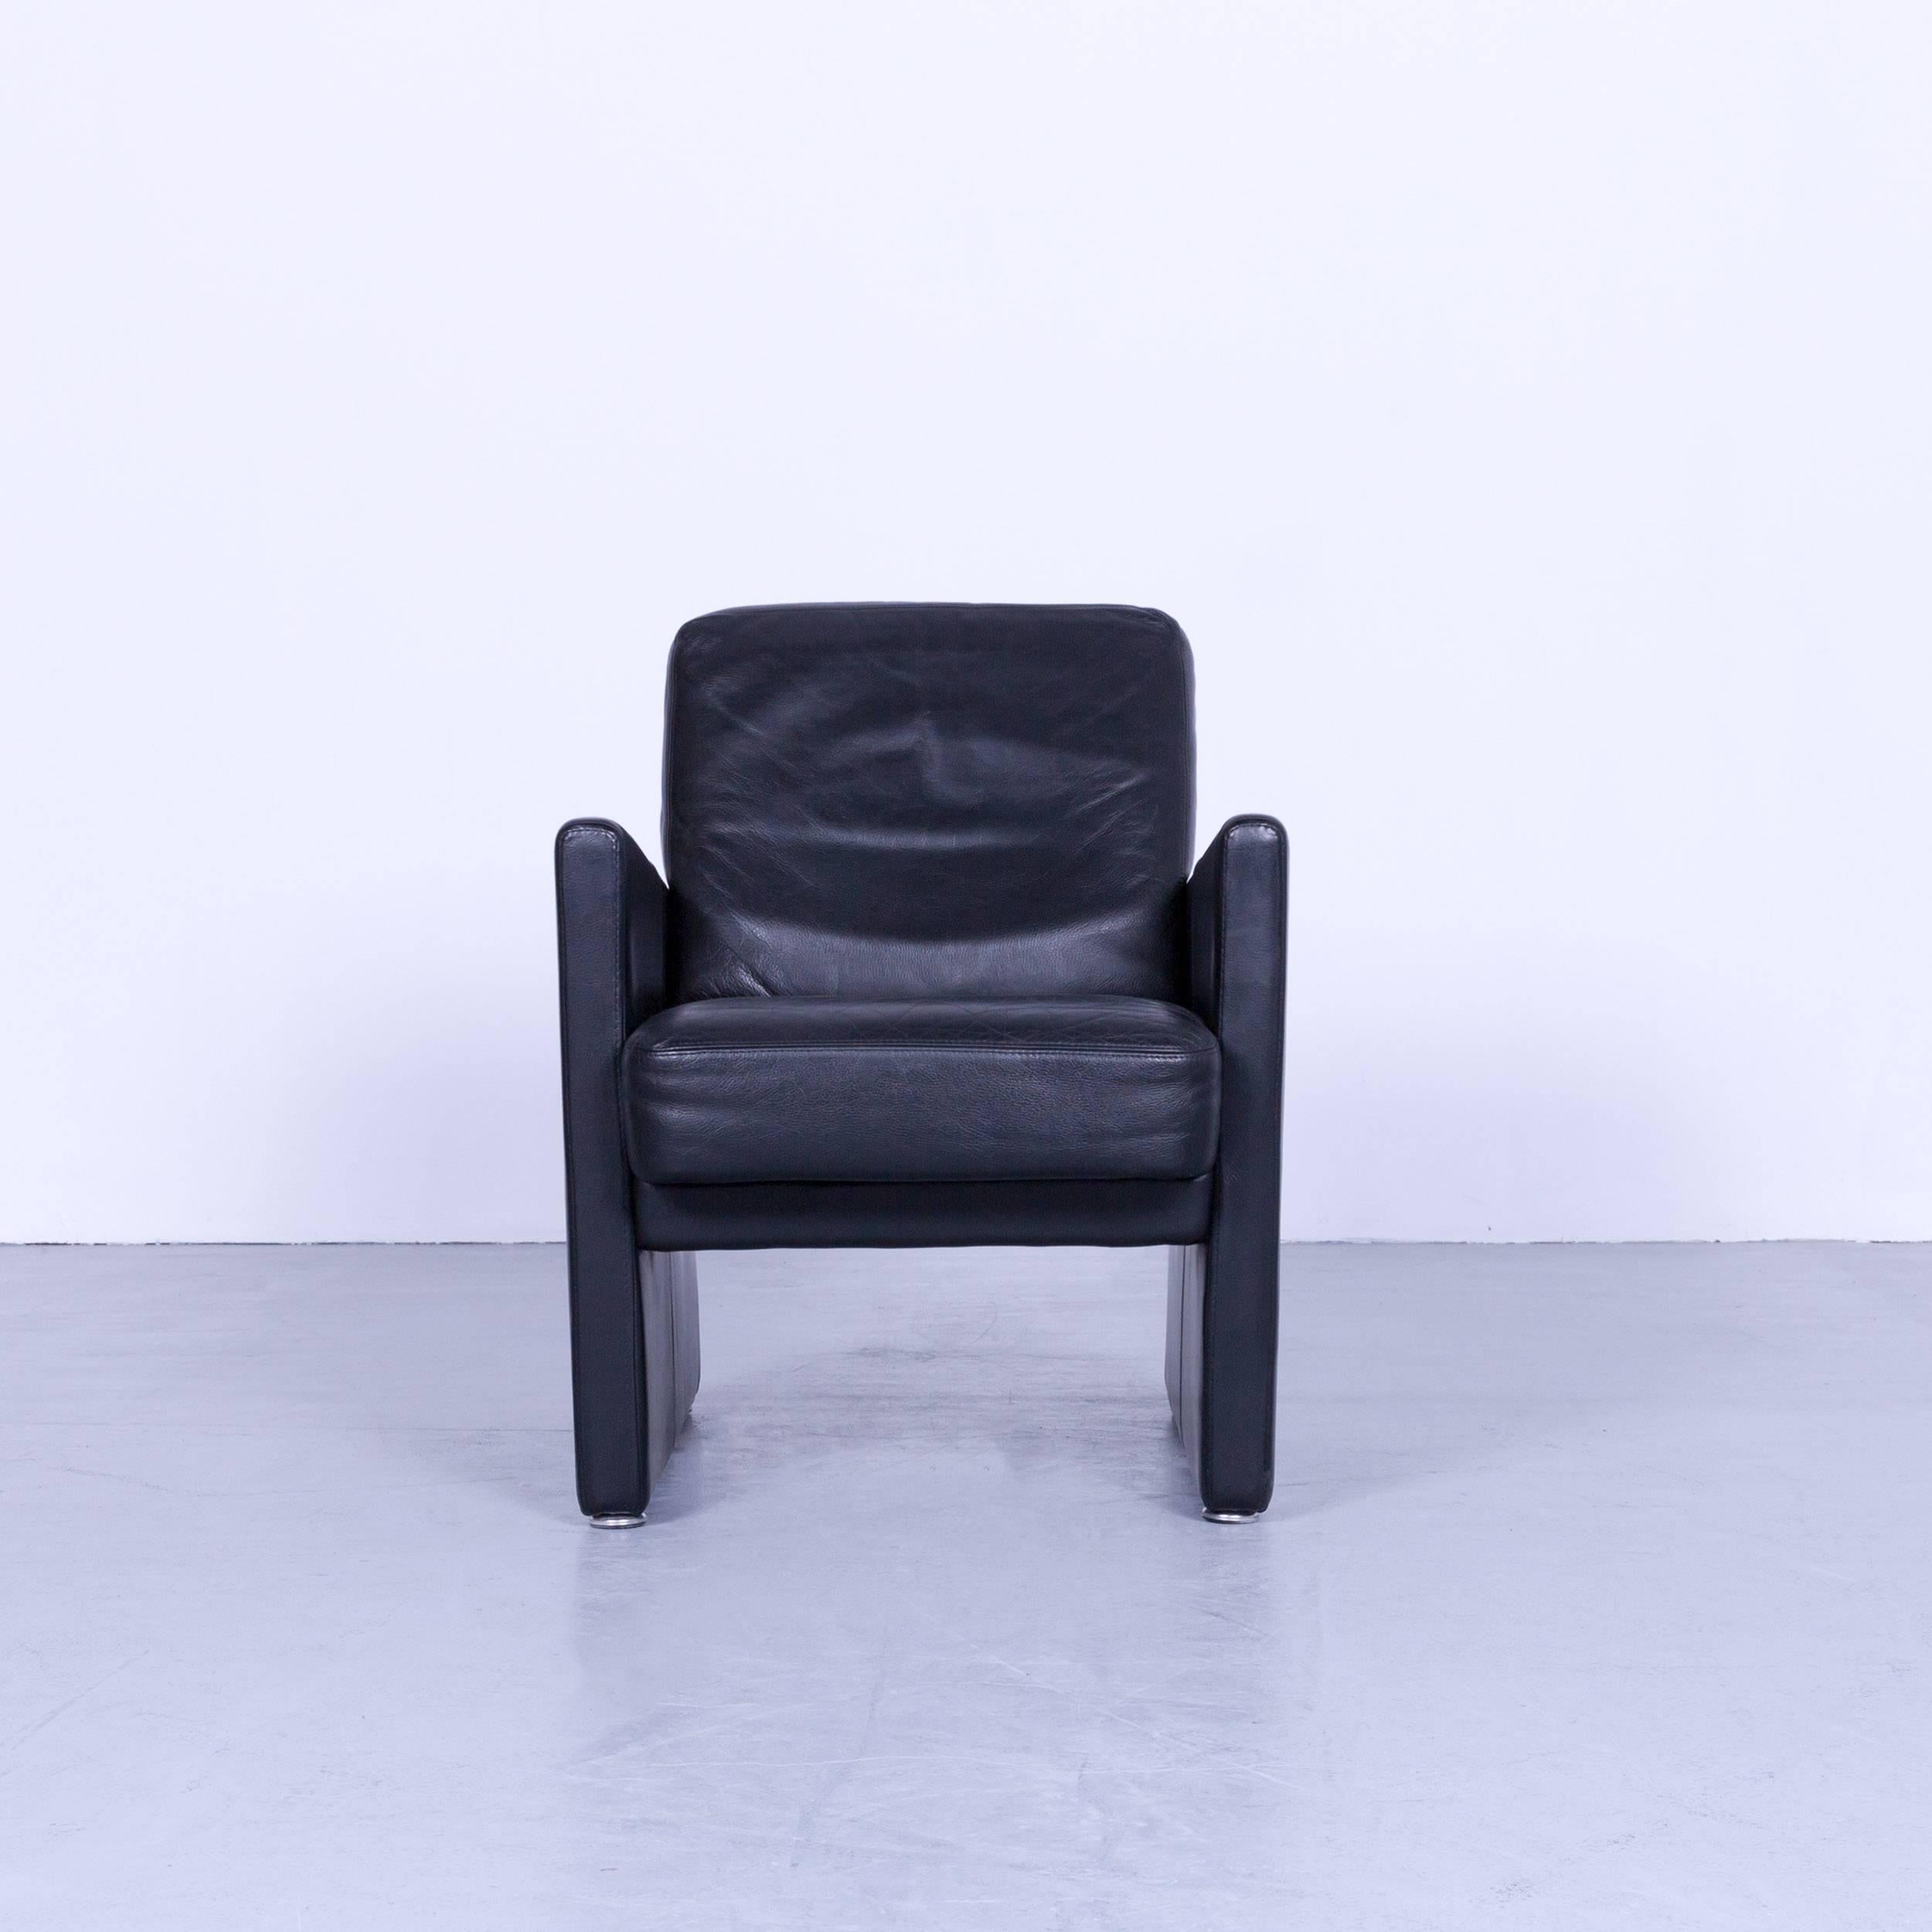 Brühl & Sippold designer armchair black leather simple form made in Germany, made for pure elegance and comfort.